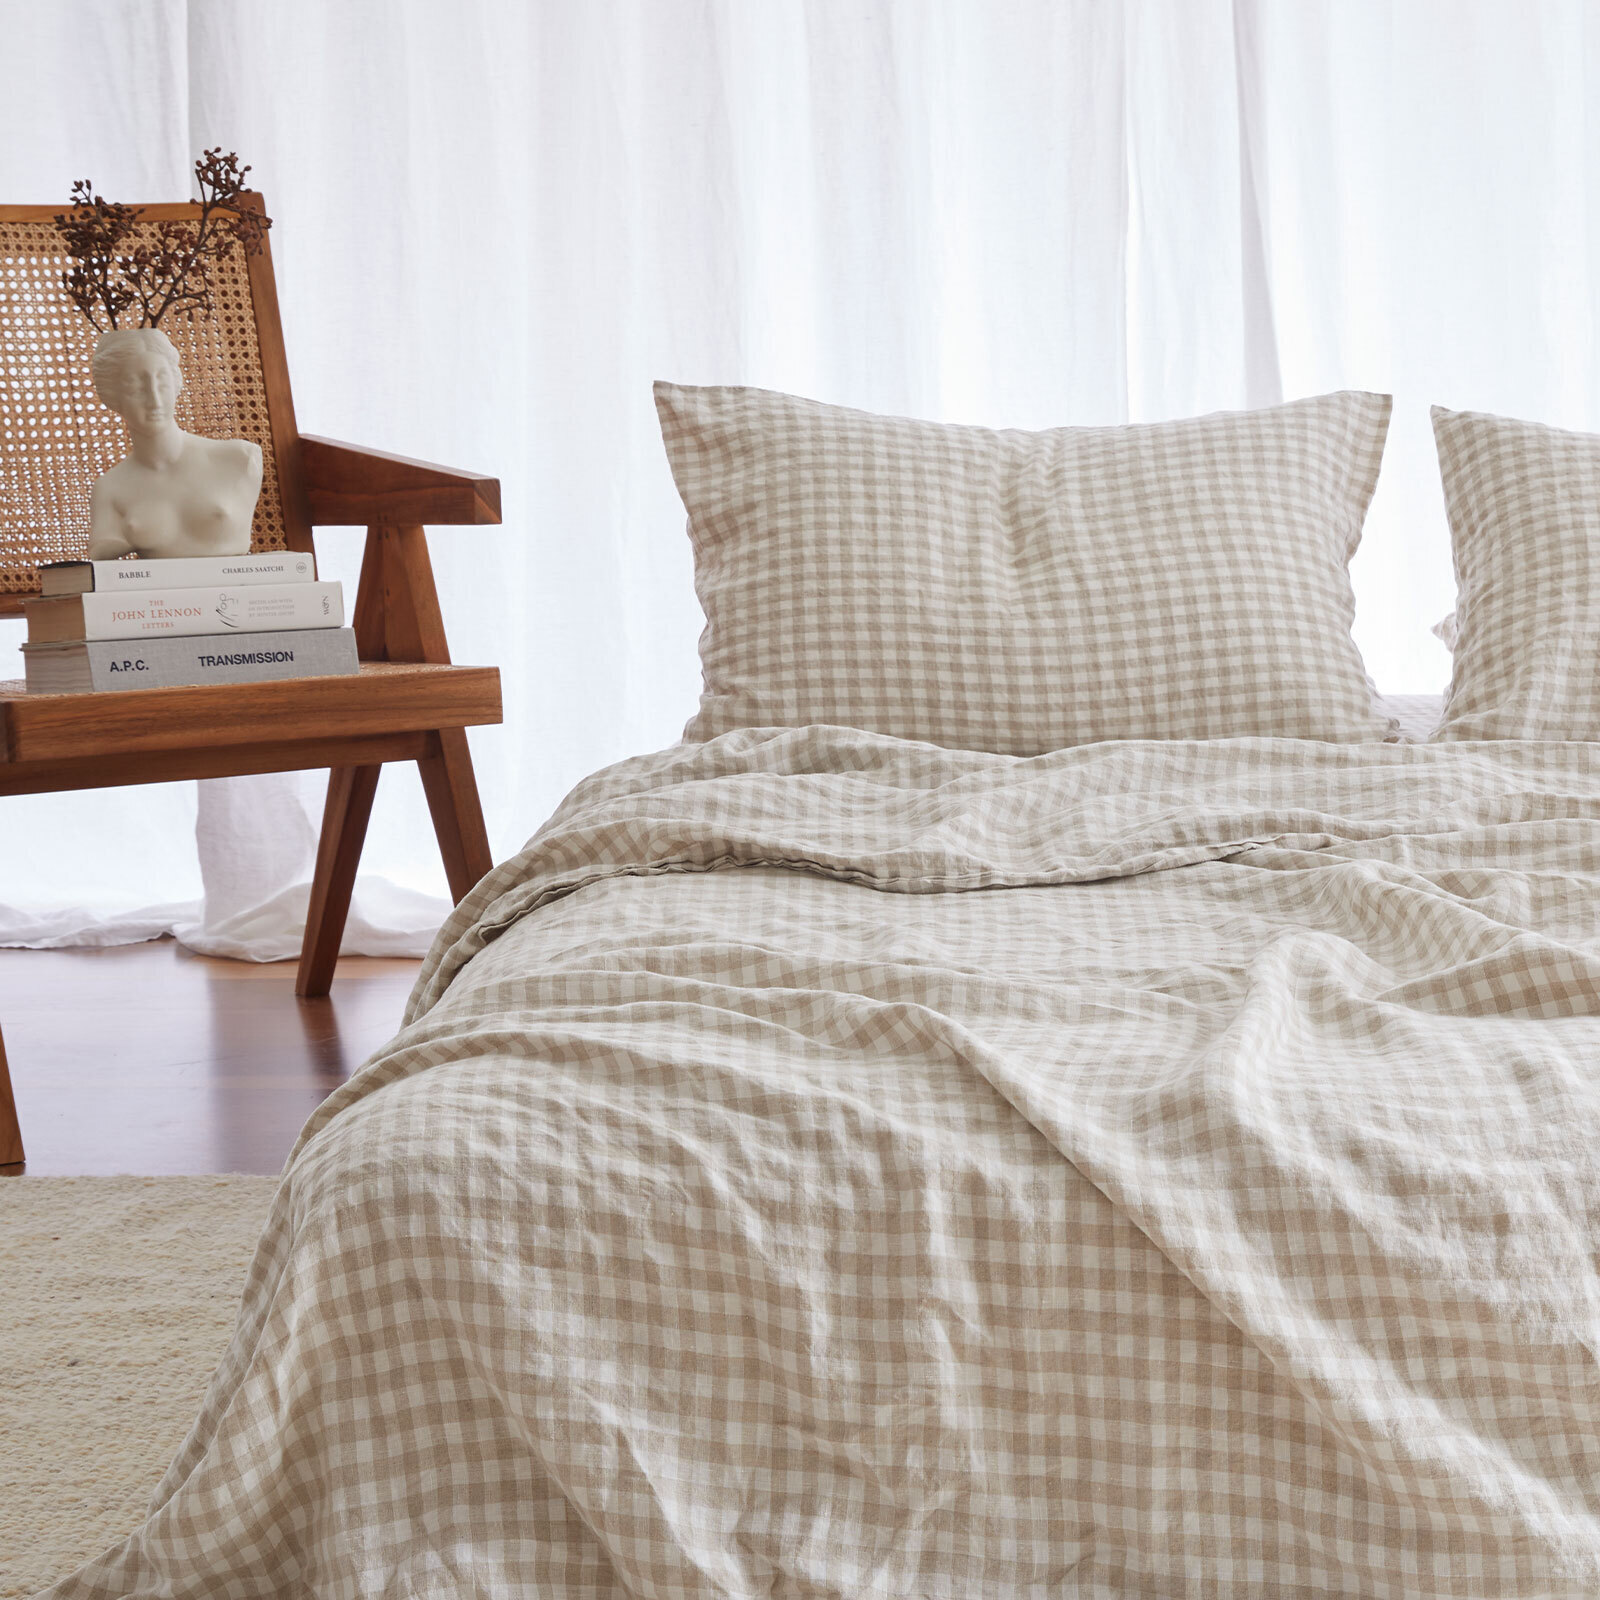 100% pure French linen Duvet Cover in Beige Gingham